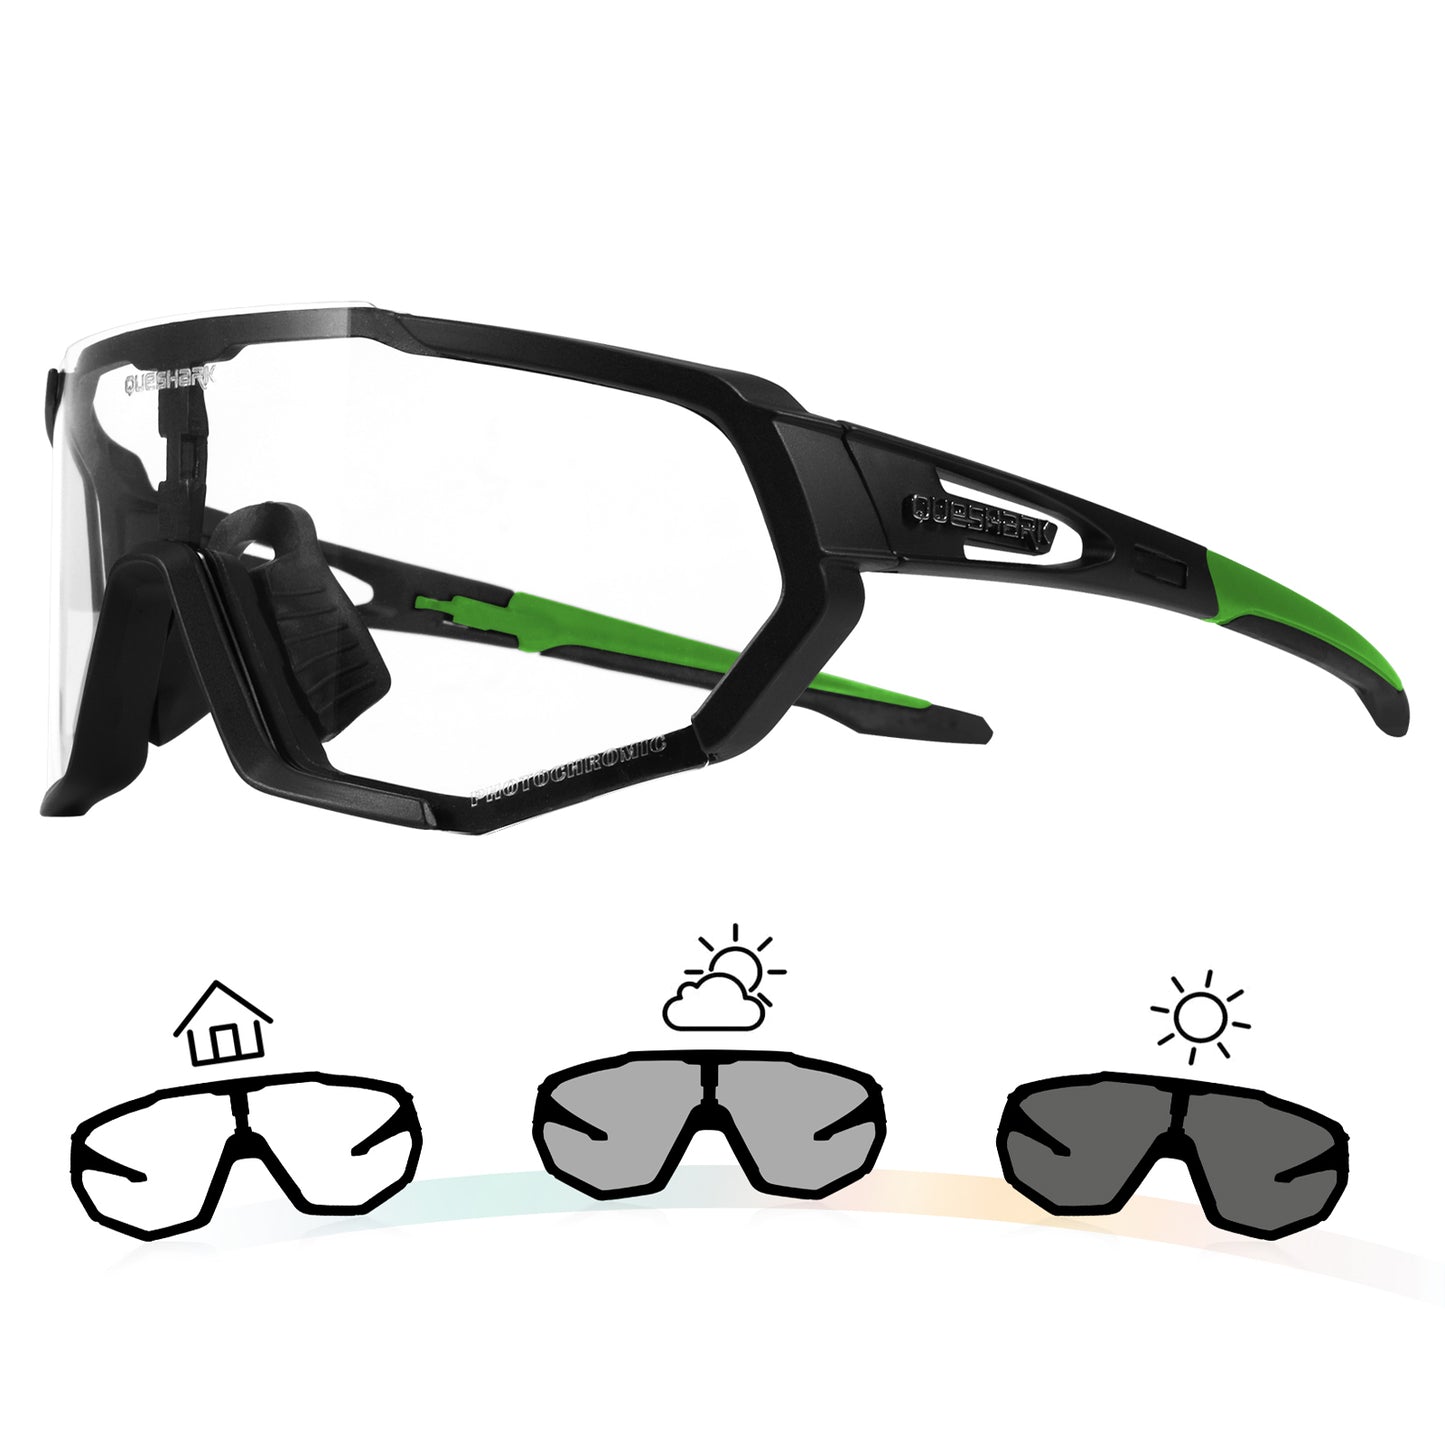 QE48 BS Queshark Photochromic Sunglasses for Men Women Safety Cycling Glasses UV Protection Outdoor   Sport MTB Black Green